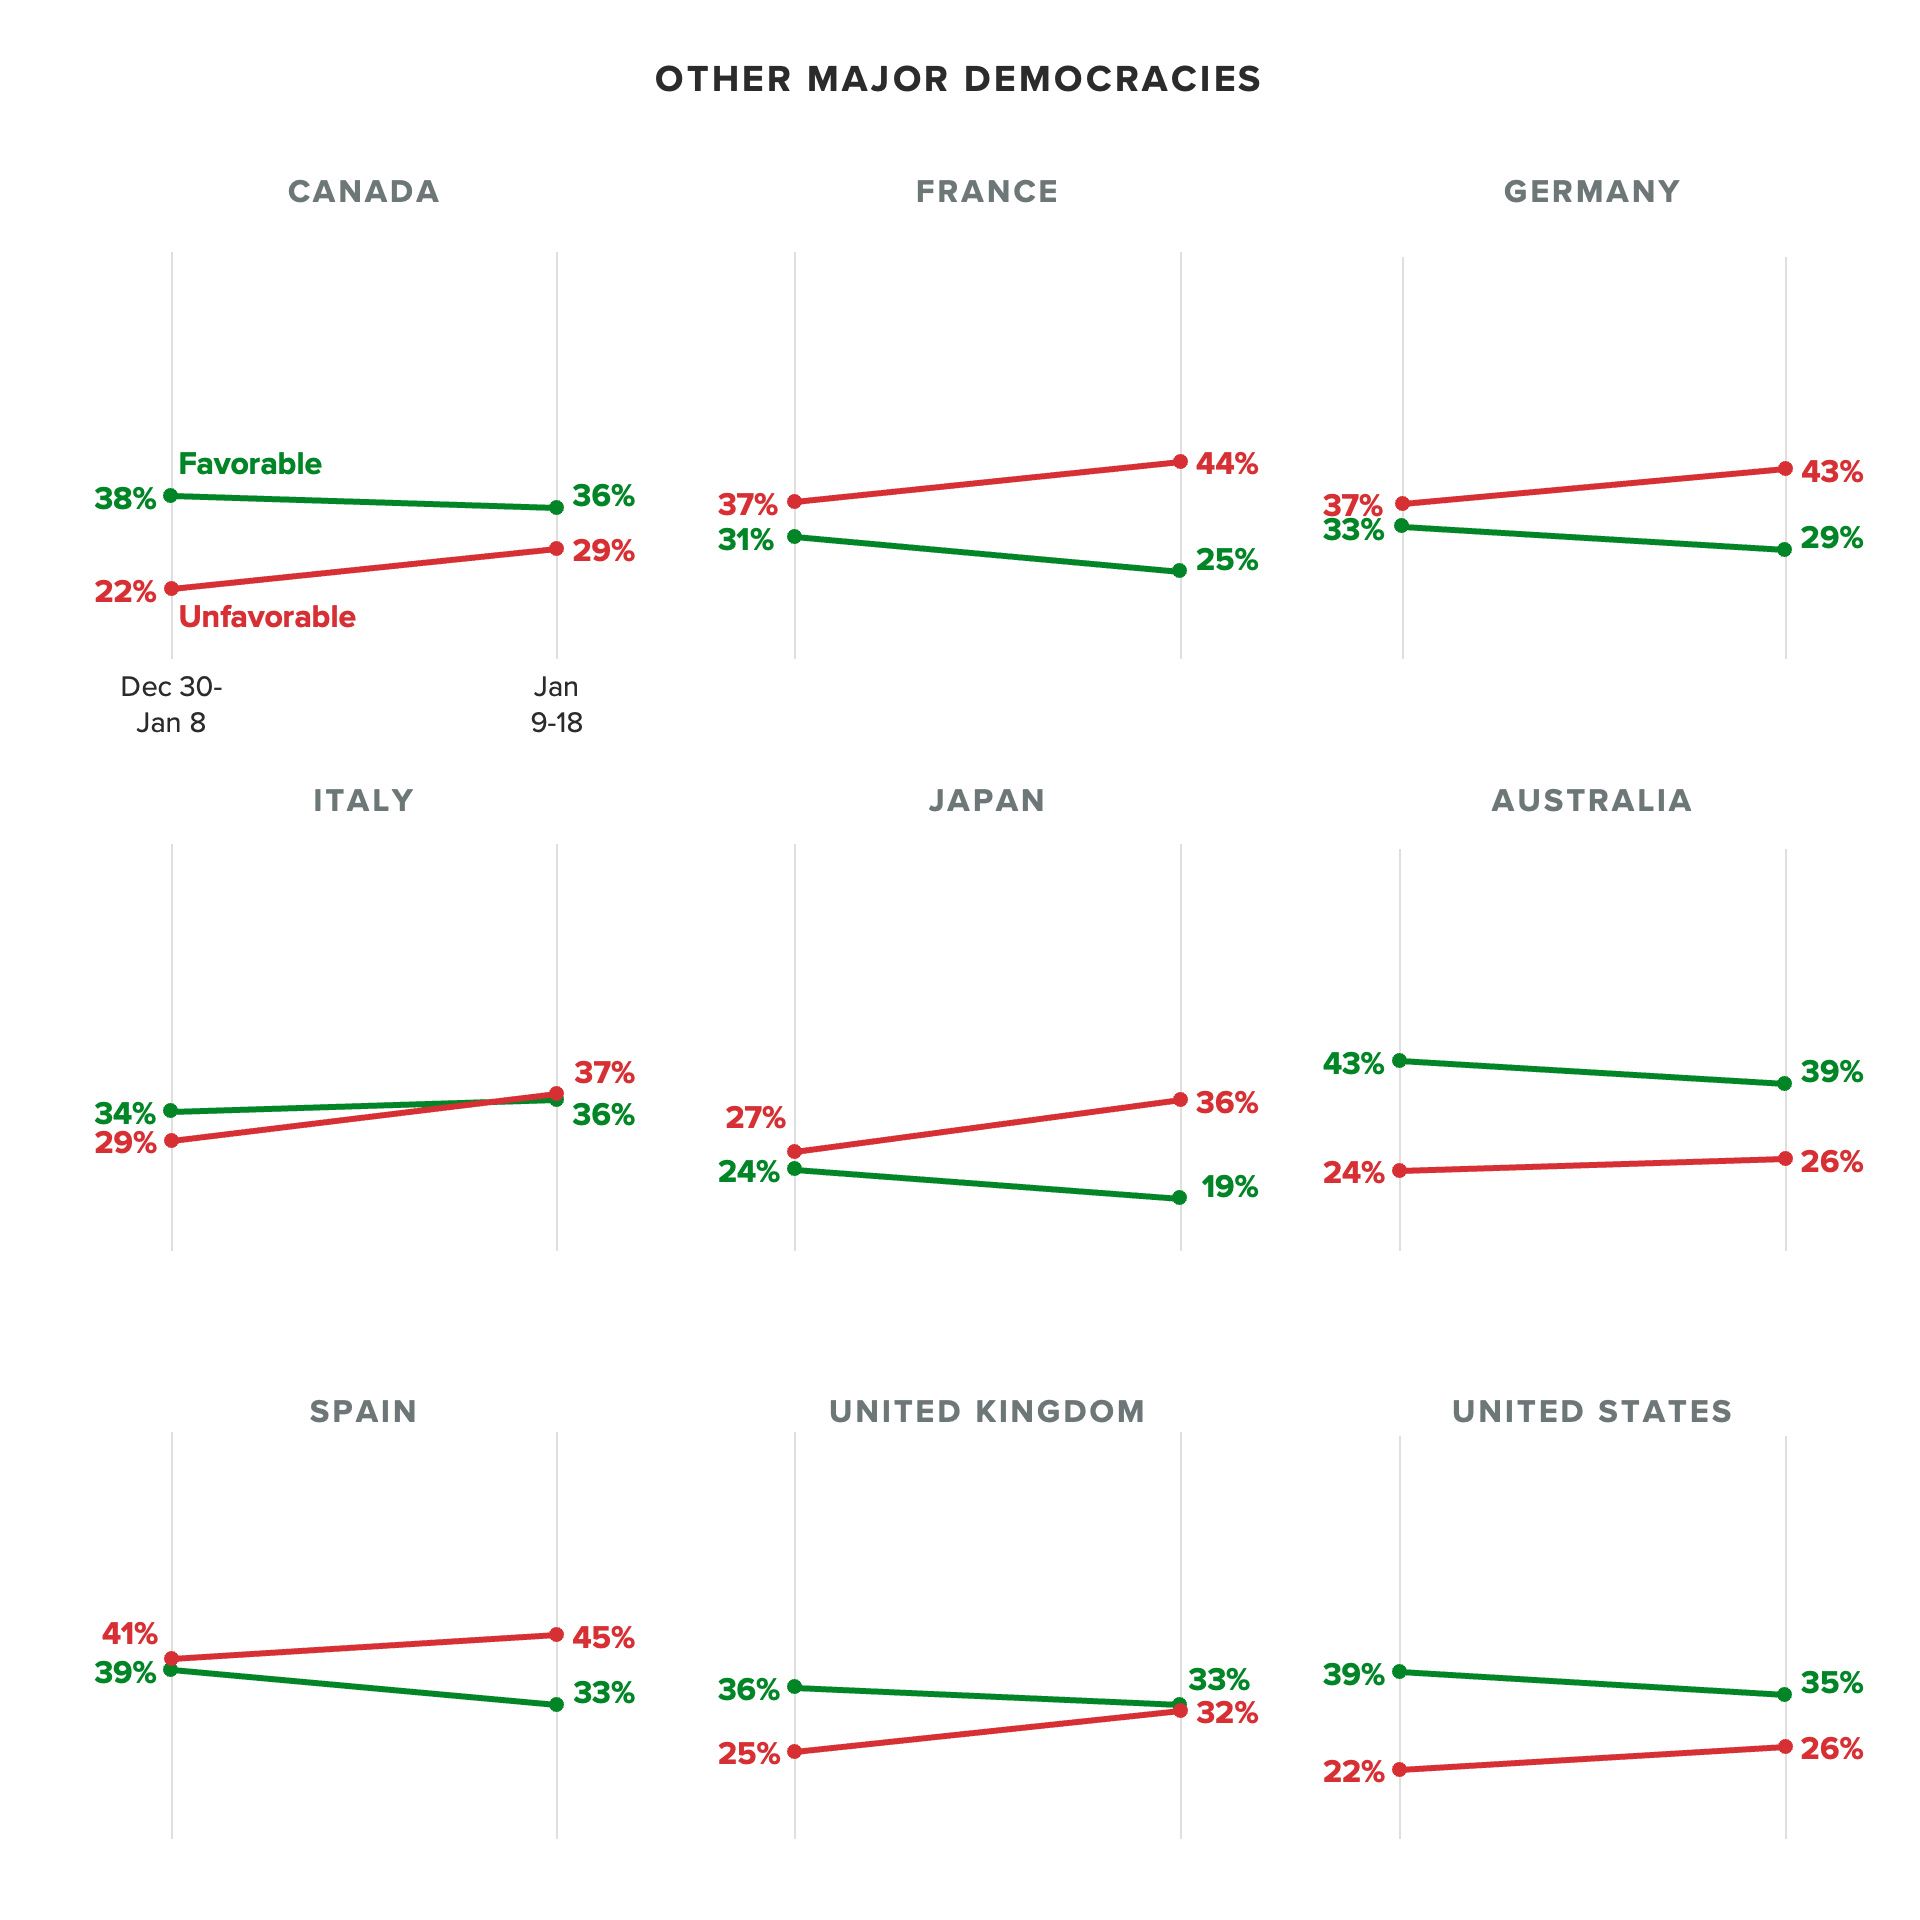 Trend lines of countries' favorable and unfavorable views of Brazil following the Jan. 8 incident, showing favorable views declined by an average of 2 percentage points.